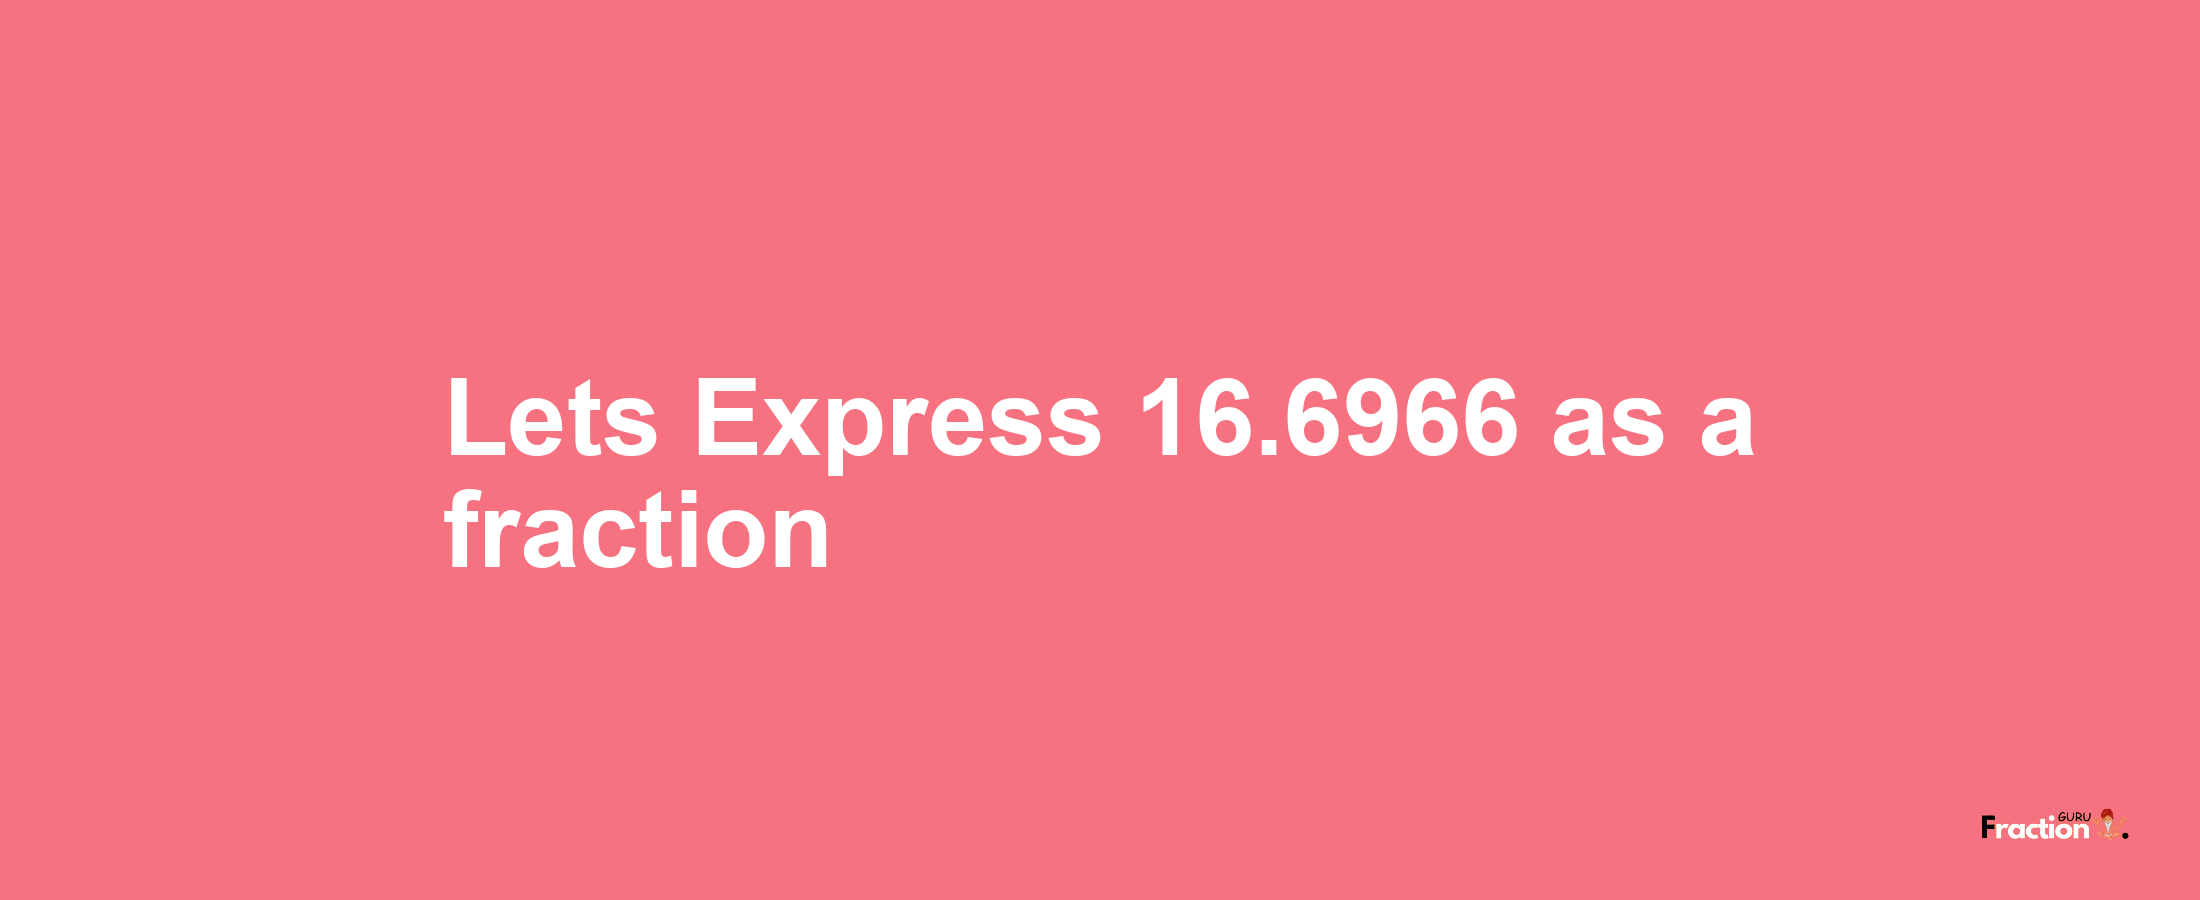 Lets Express 16.6966 as afraction